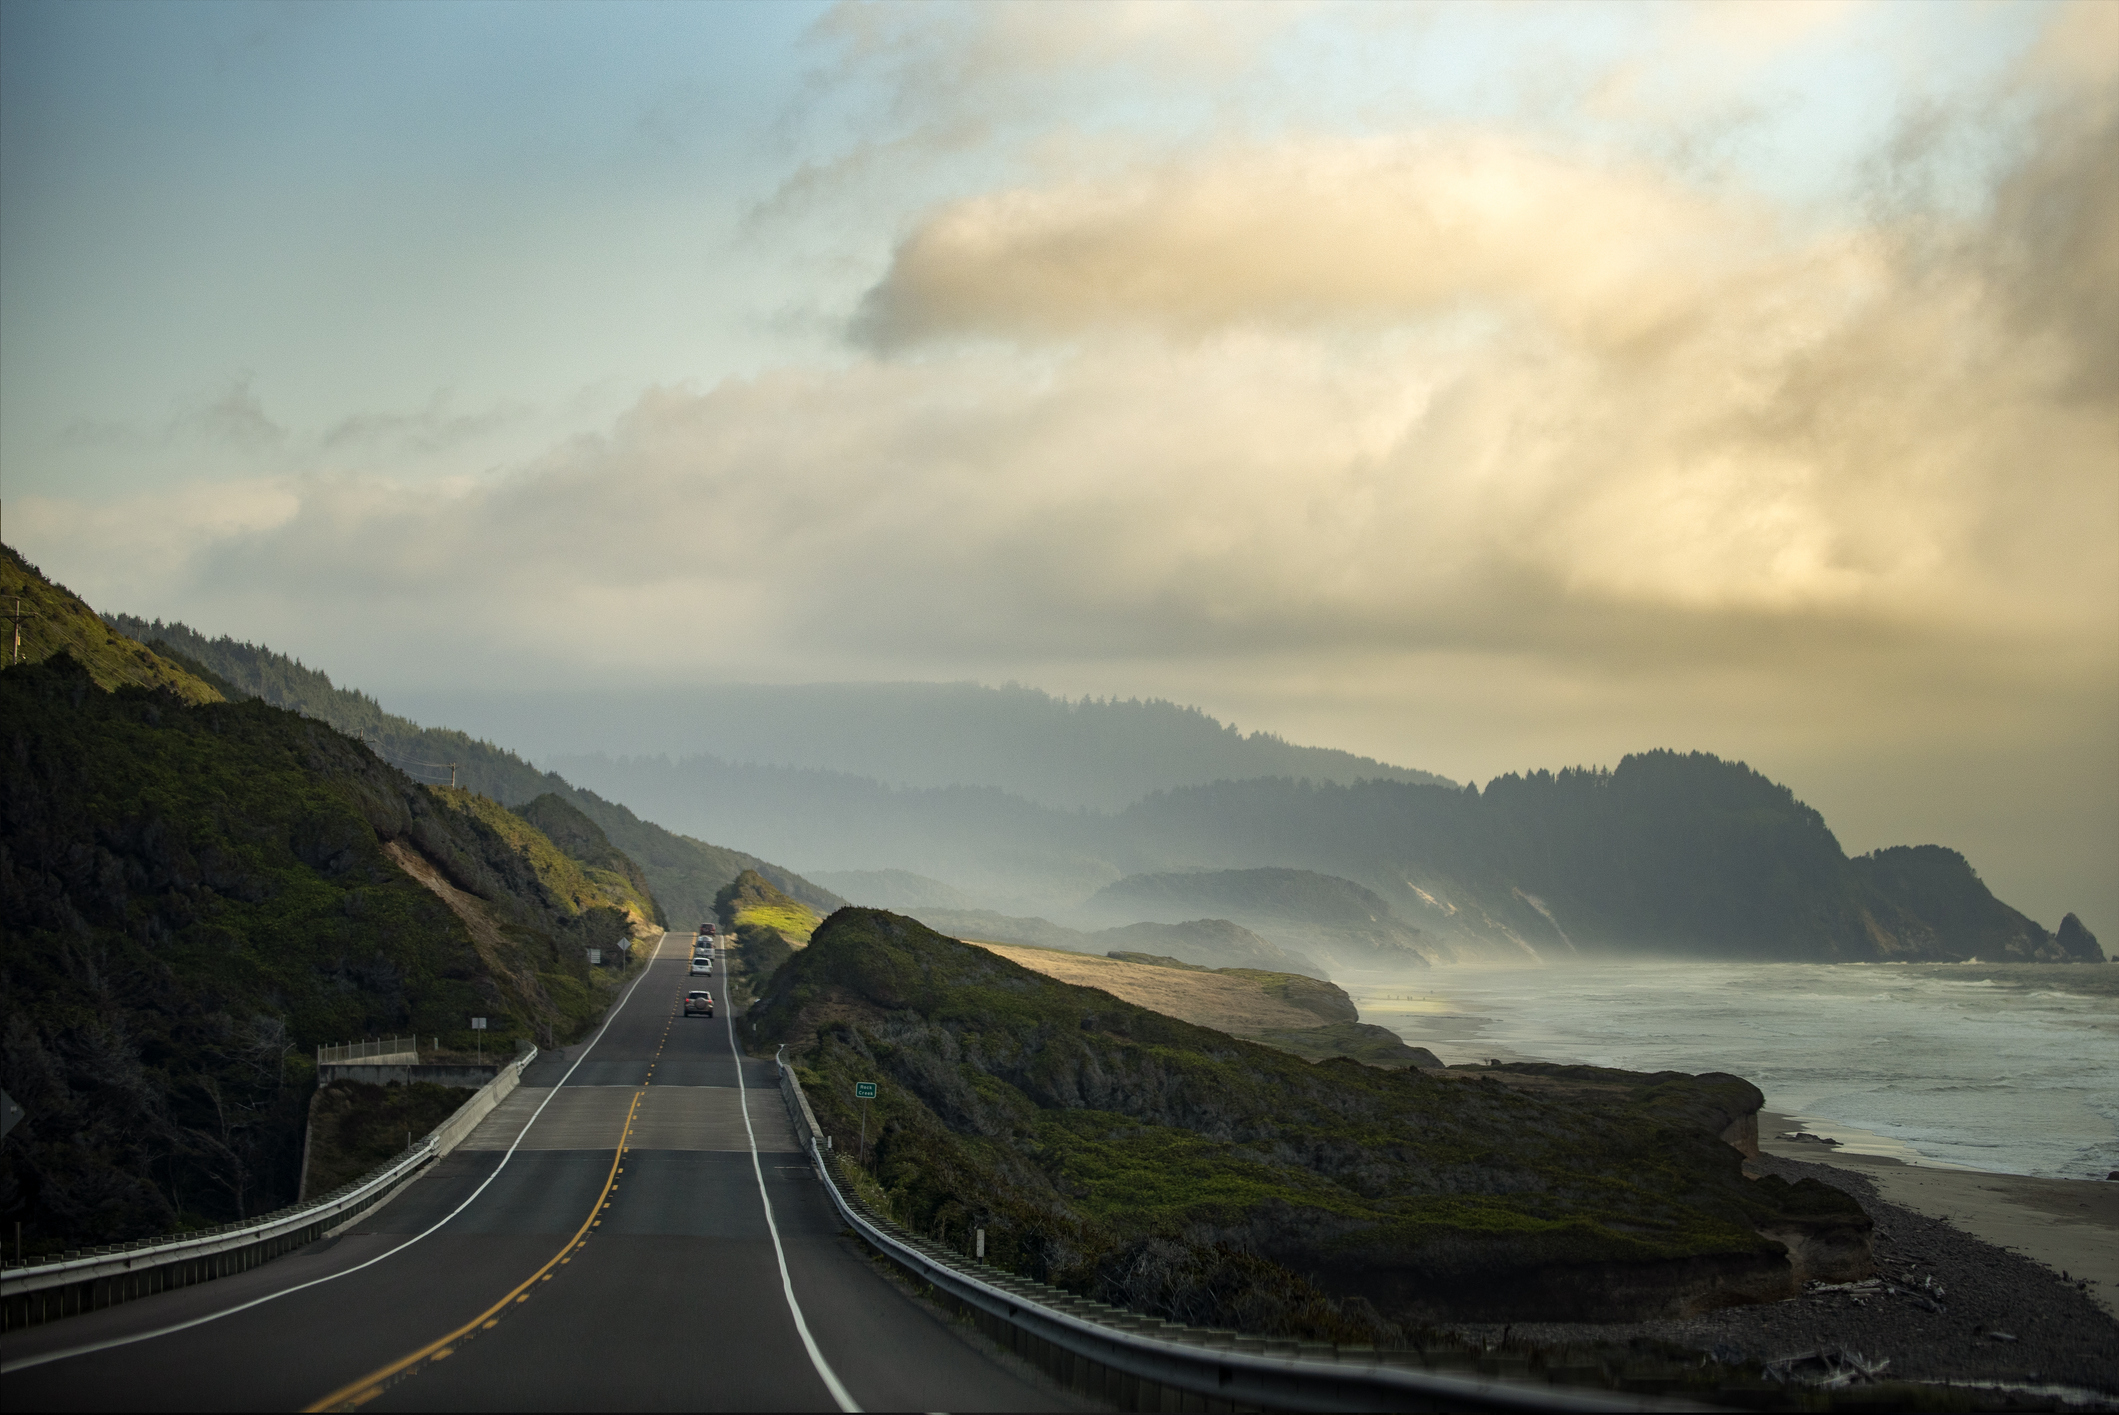 Coastal highway with vehicles, ocean on one side, hills and cloudy skies above